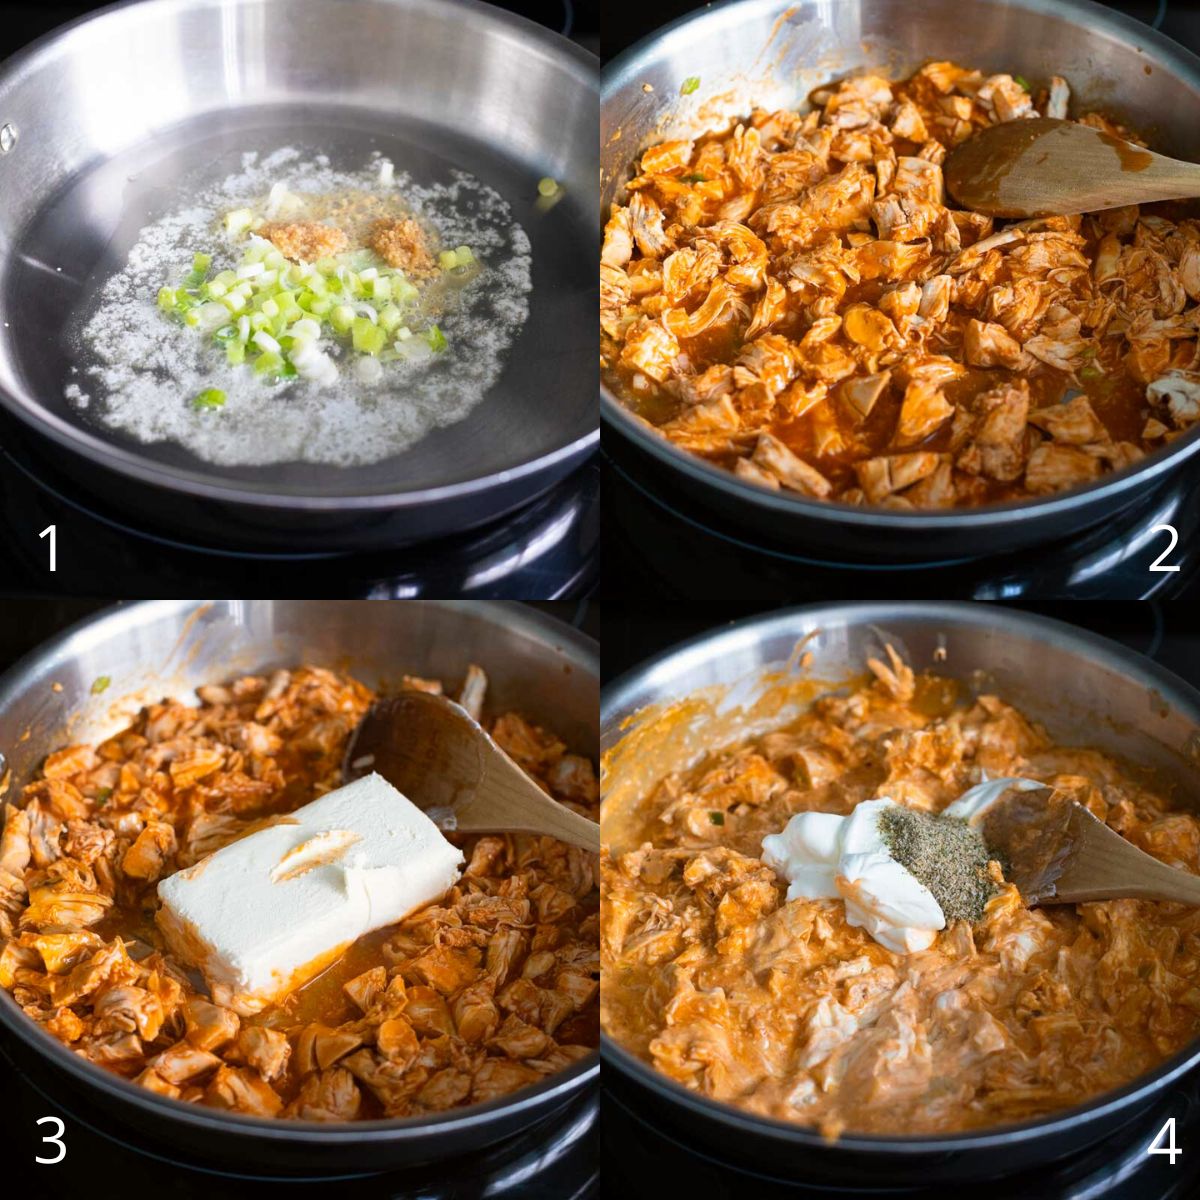 The step by step photos show how to make the buffalo chicken sauce in a skillet.